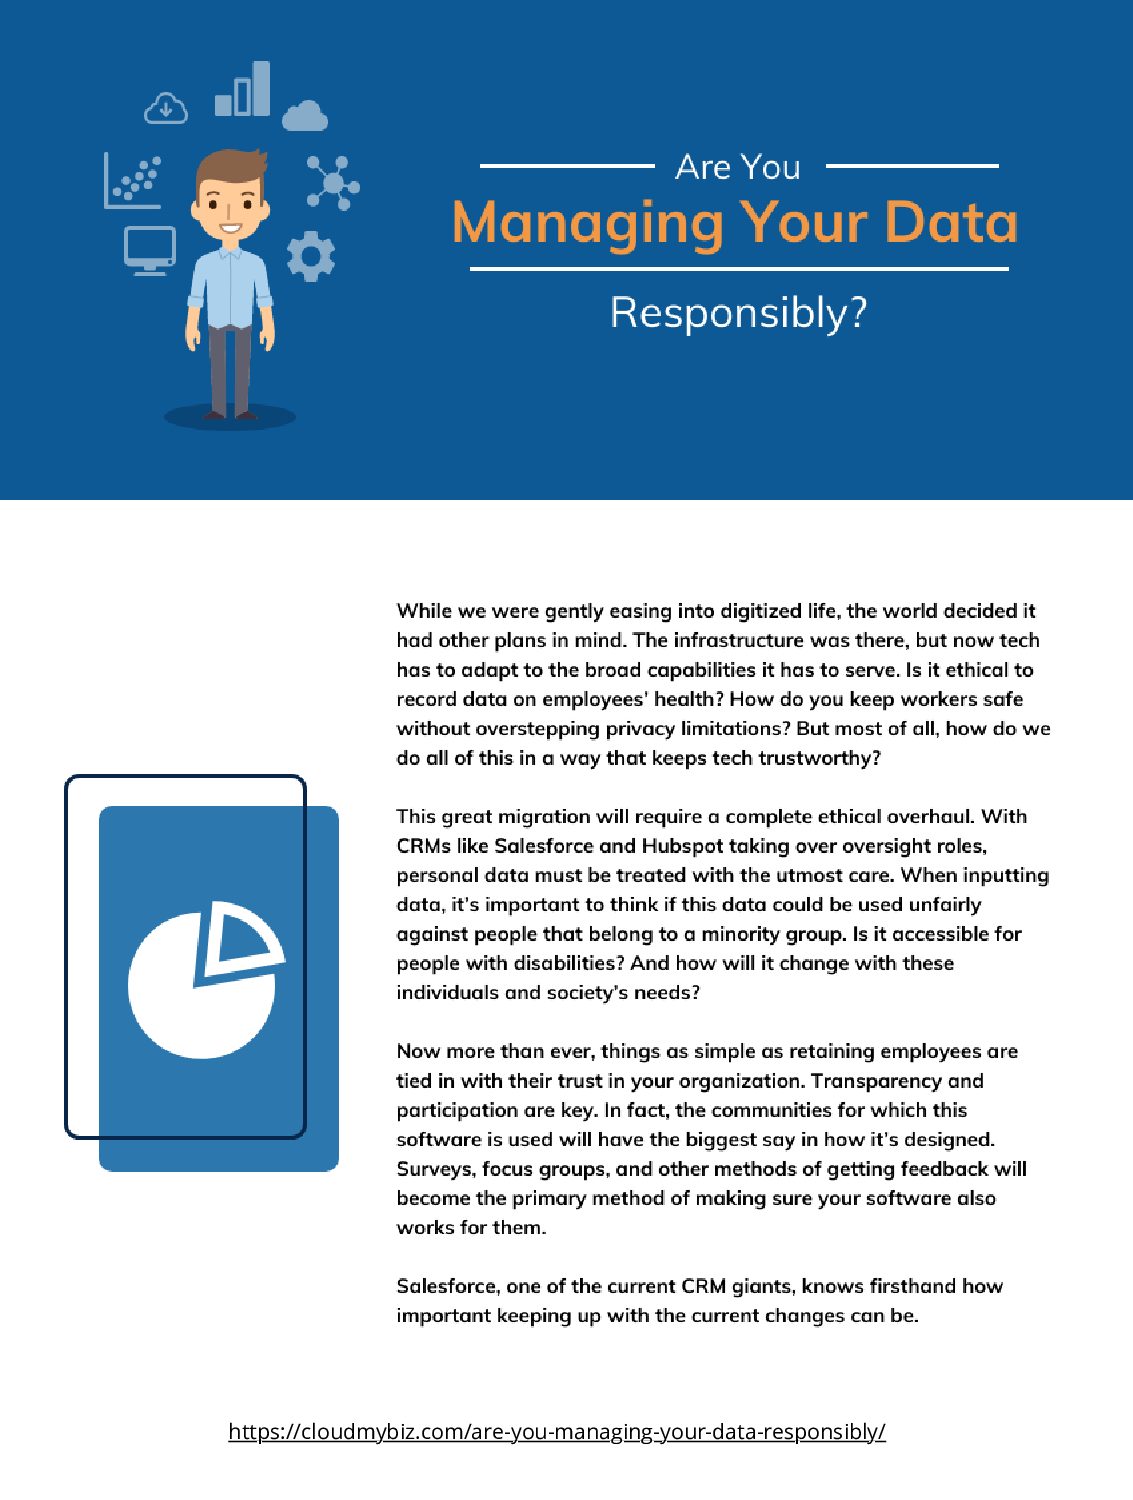 Are you managing your data responsibly?